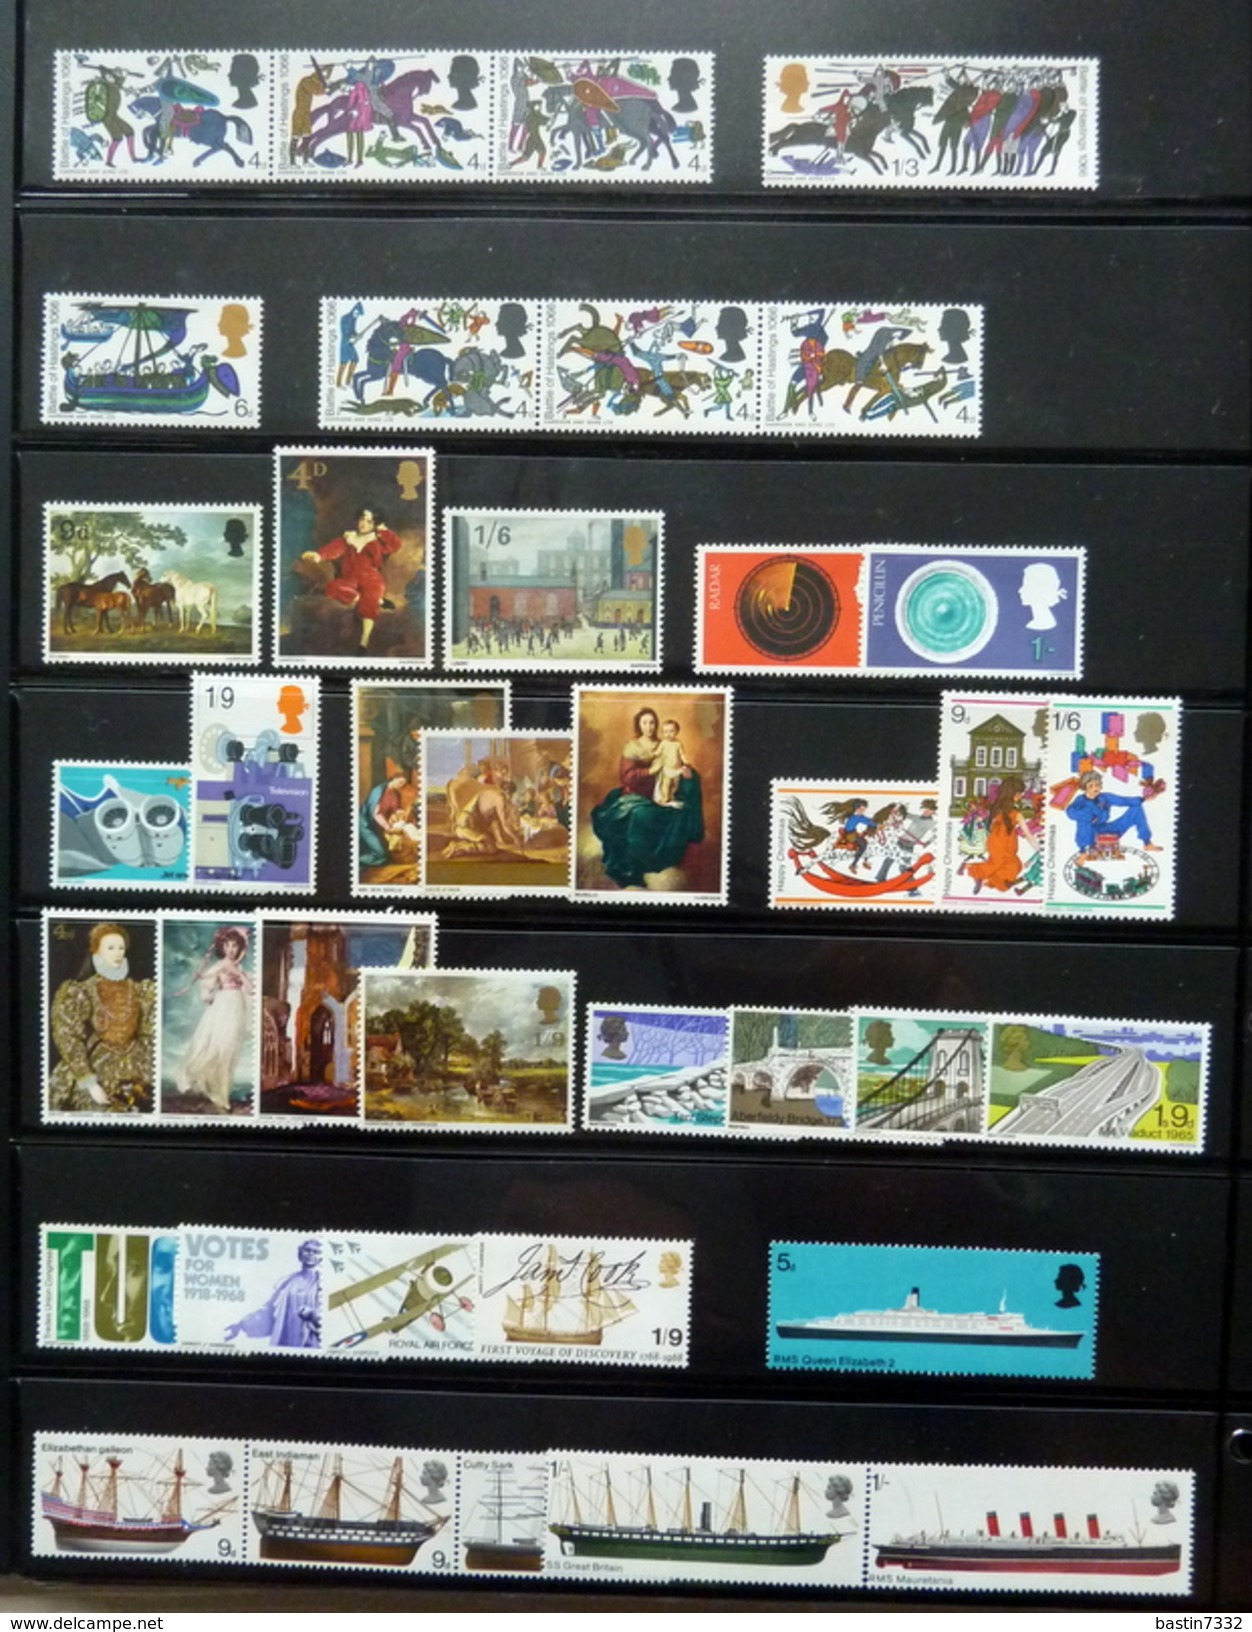 World collection incl. Asia in brandnew Importa album MNH/Postfris/Neuf sans charniere